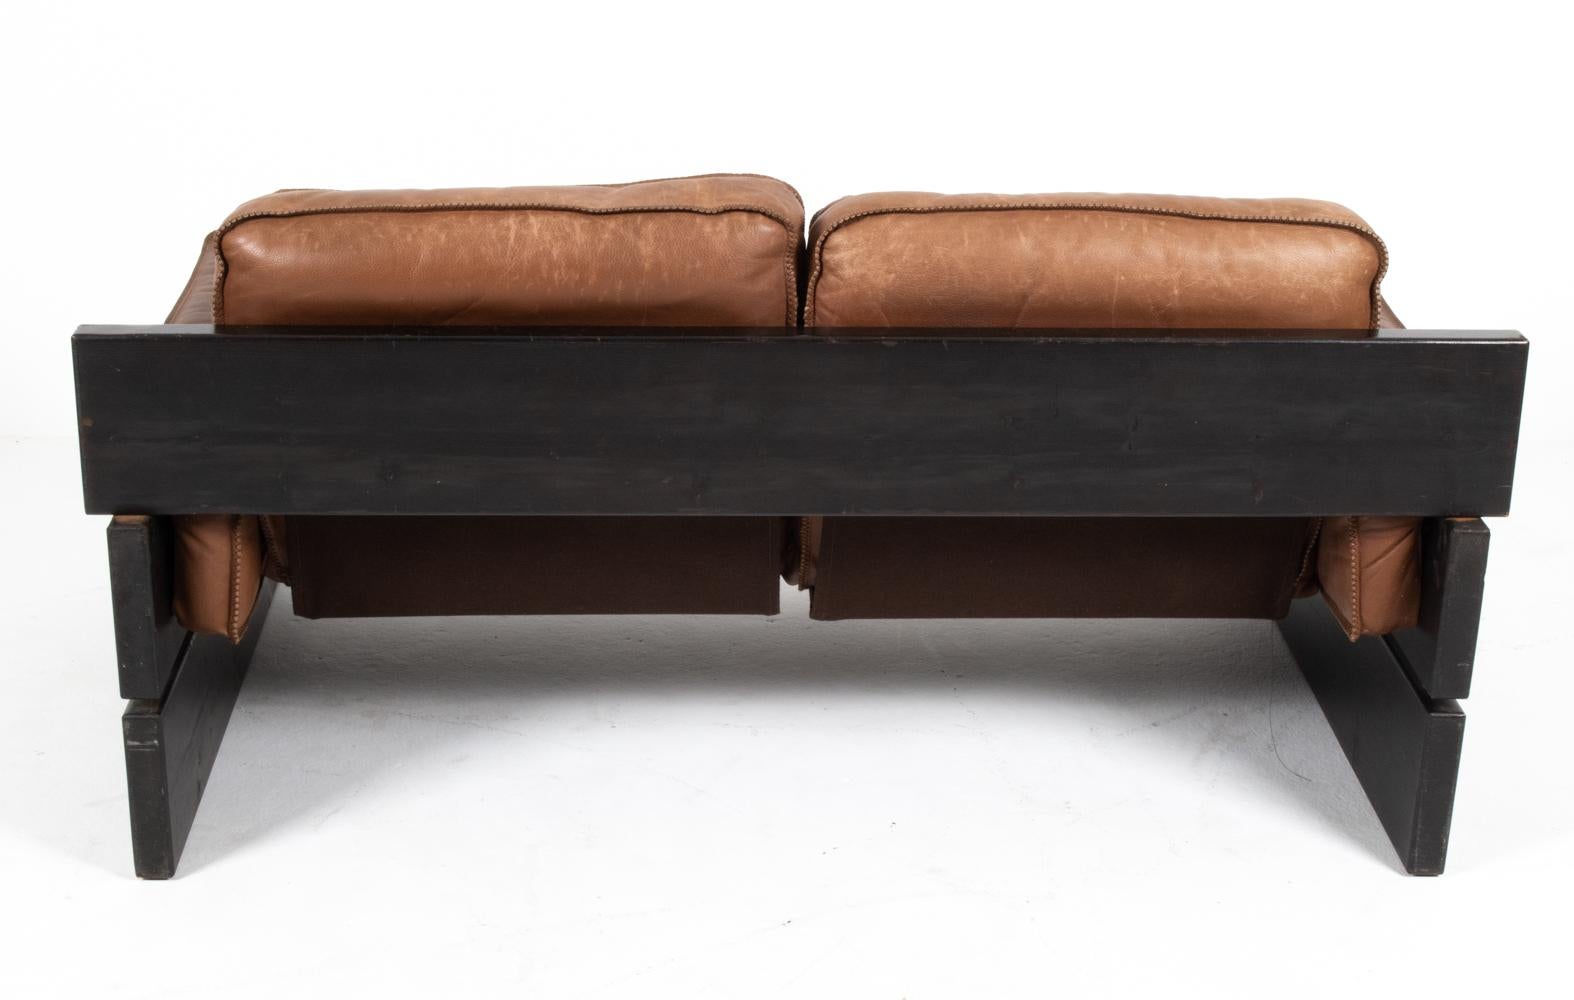 Brutalist Living Room Suite in Pine and Leather, C. 1970s For Sale 11